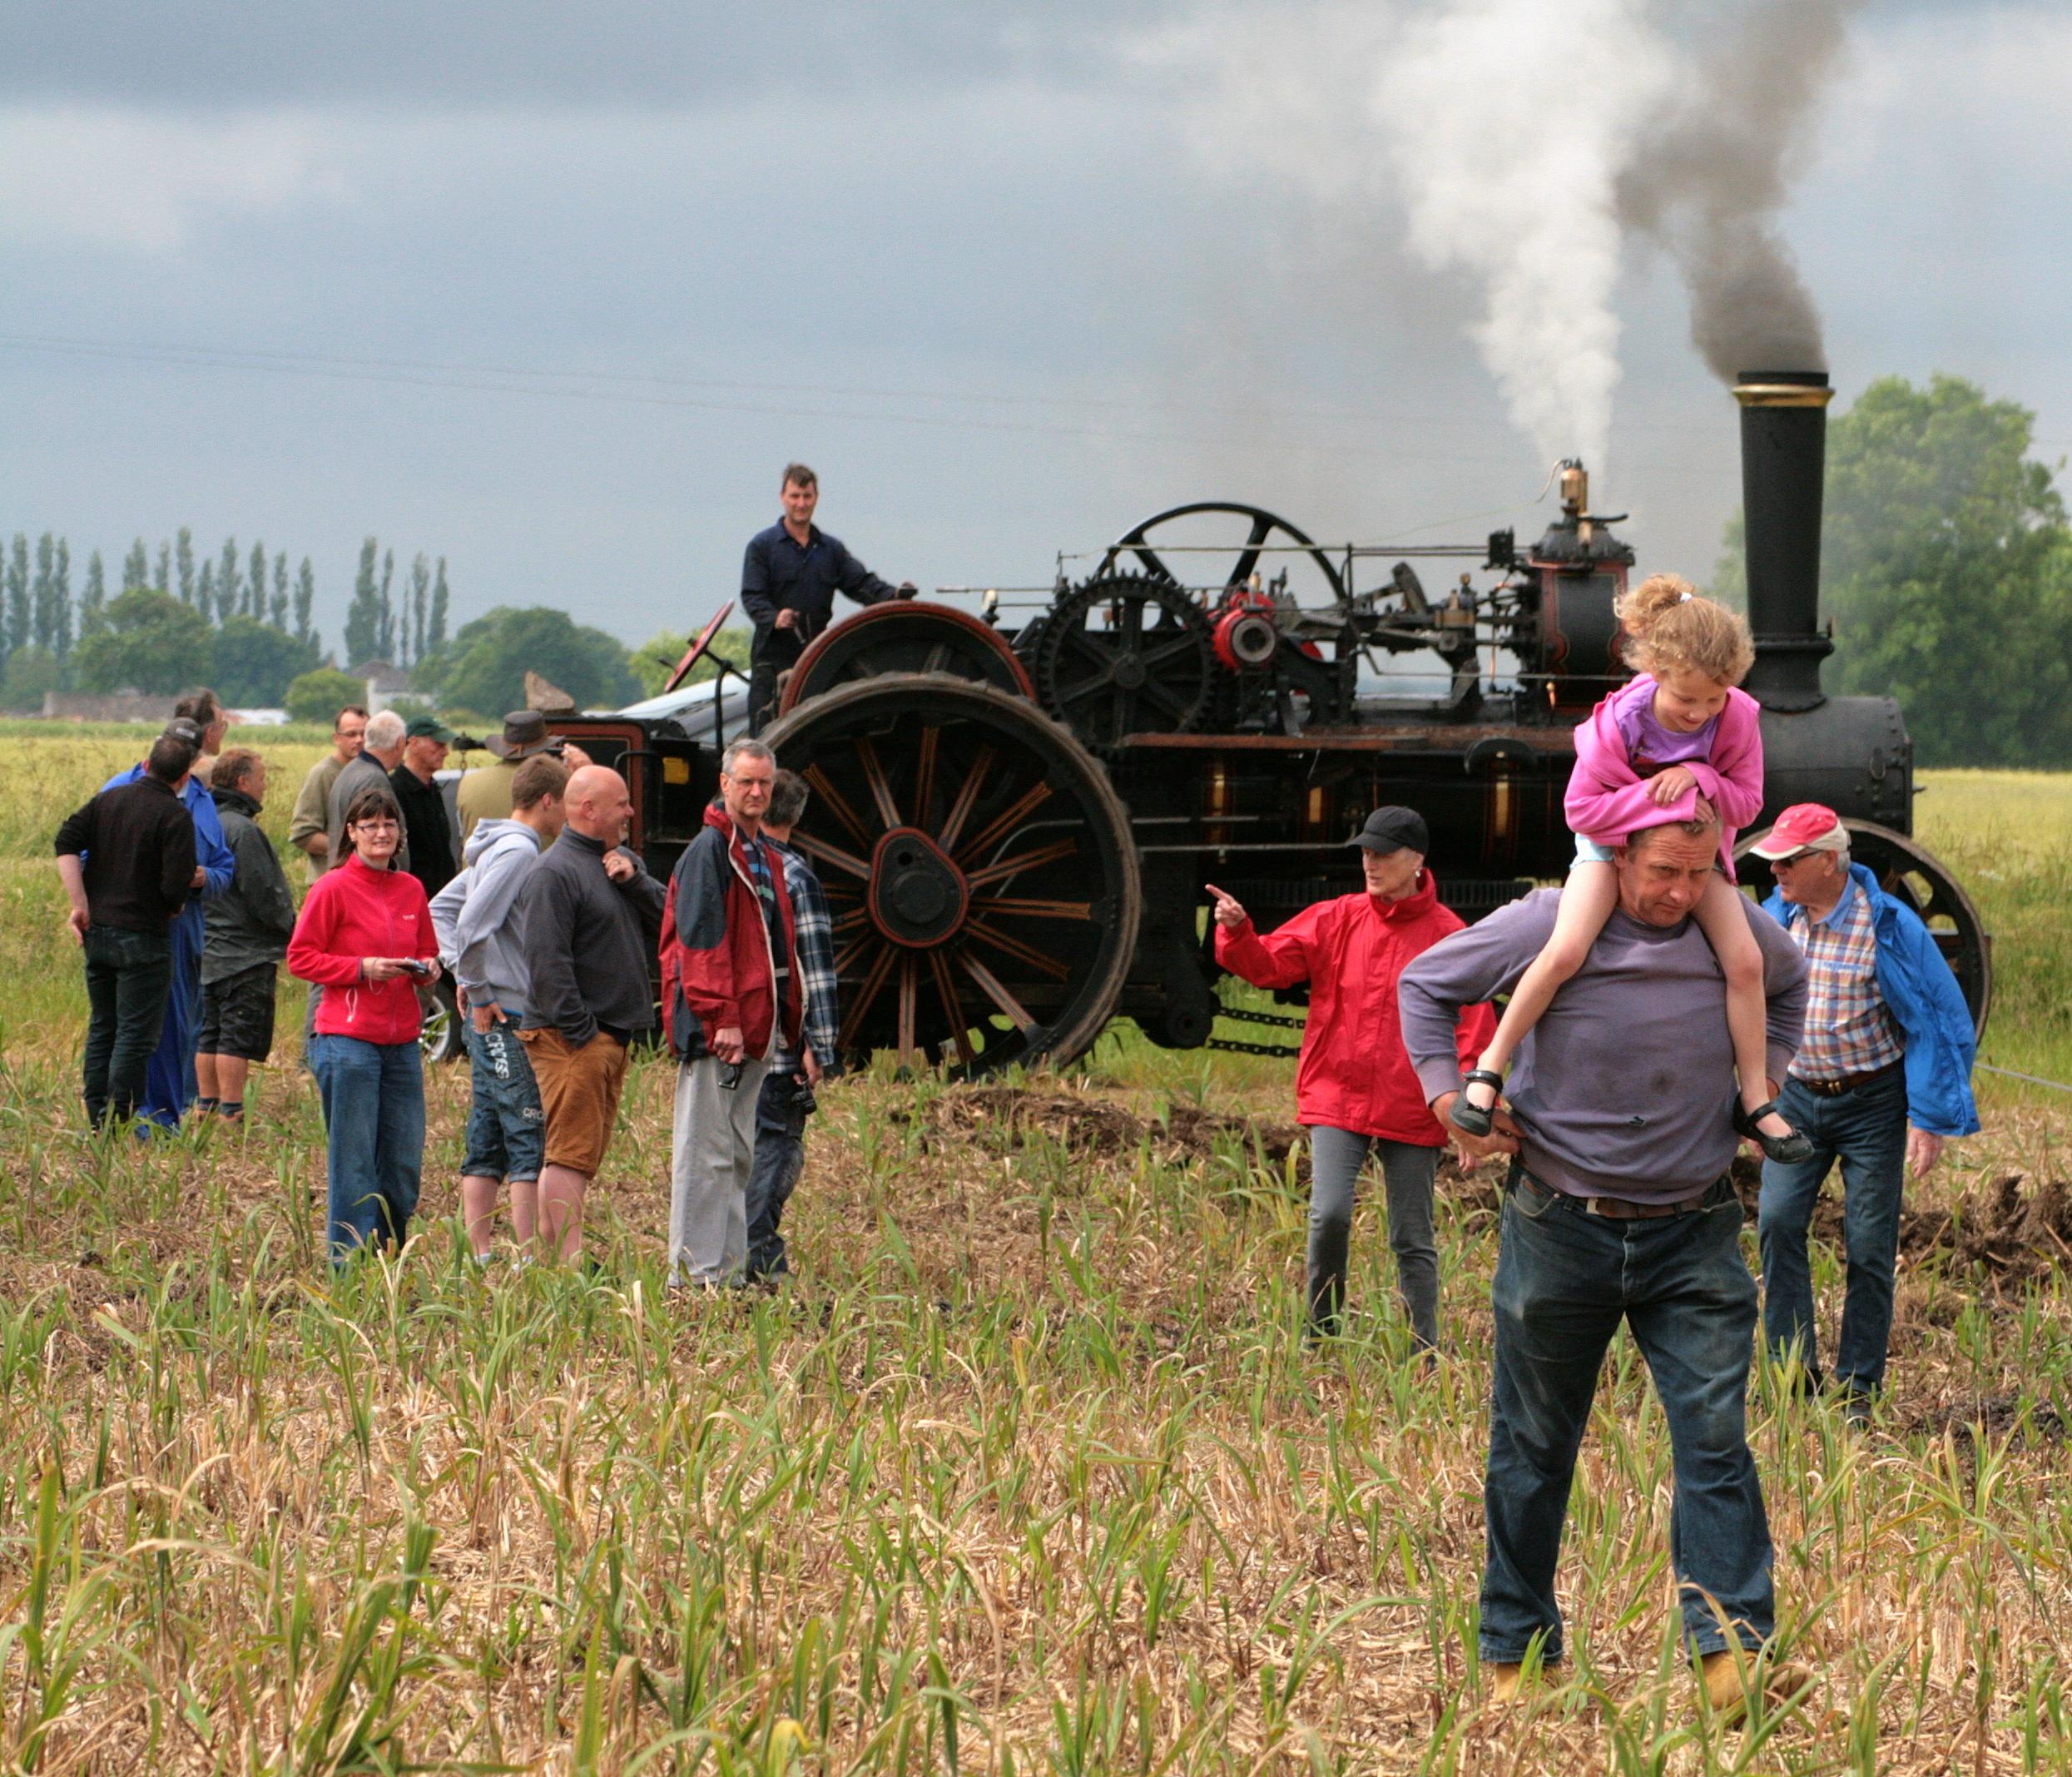 Ward and Dale engine at work with spectators